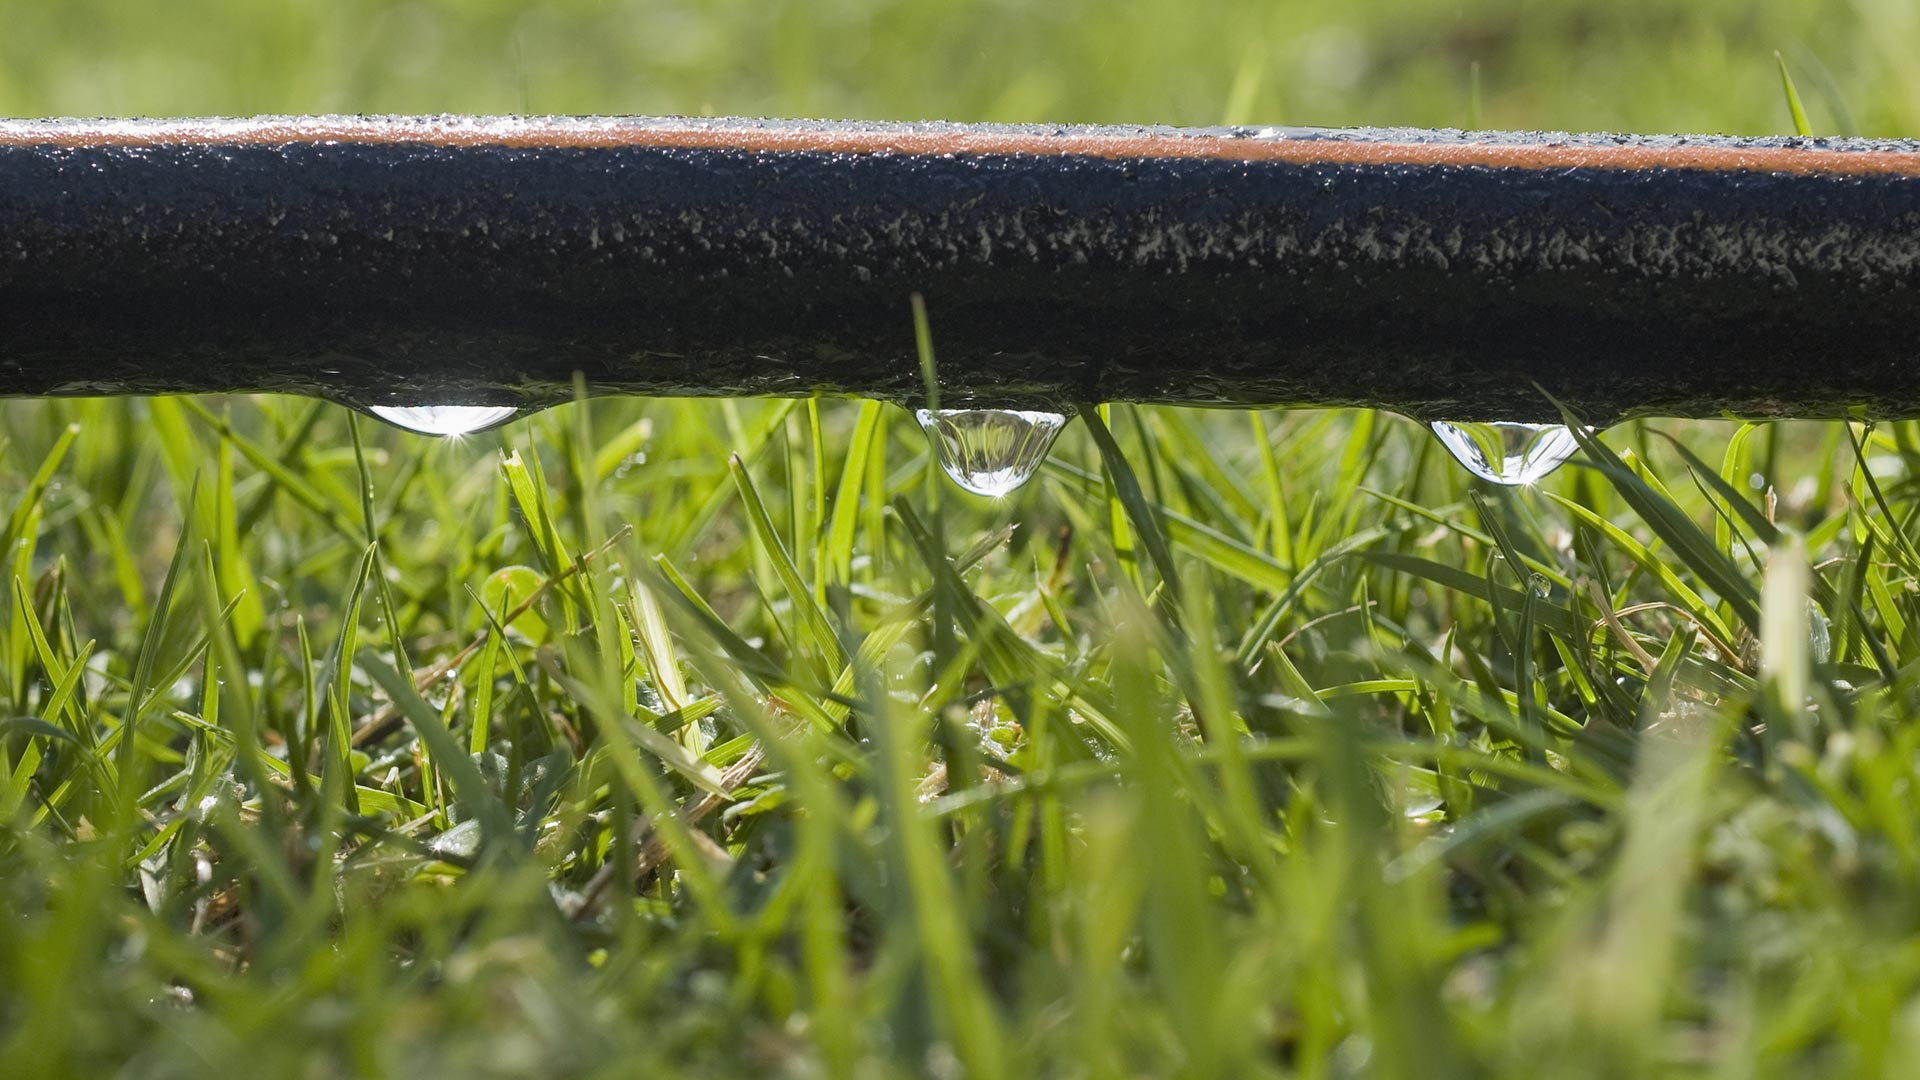 Drip Vs Sprinkler Irrigation Systems – Which One Is The Better Option?